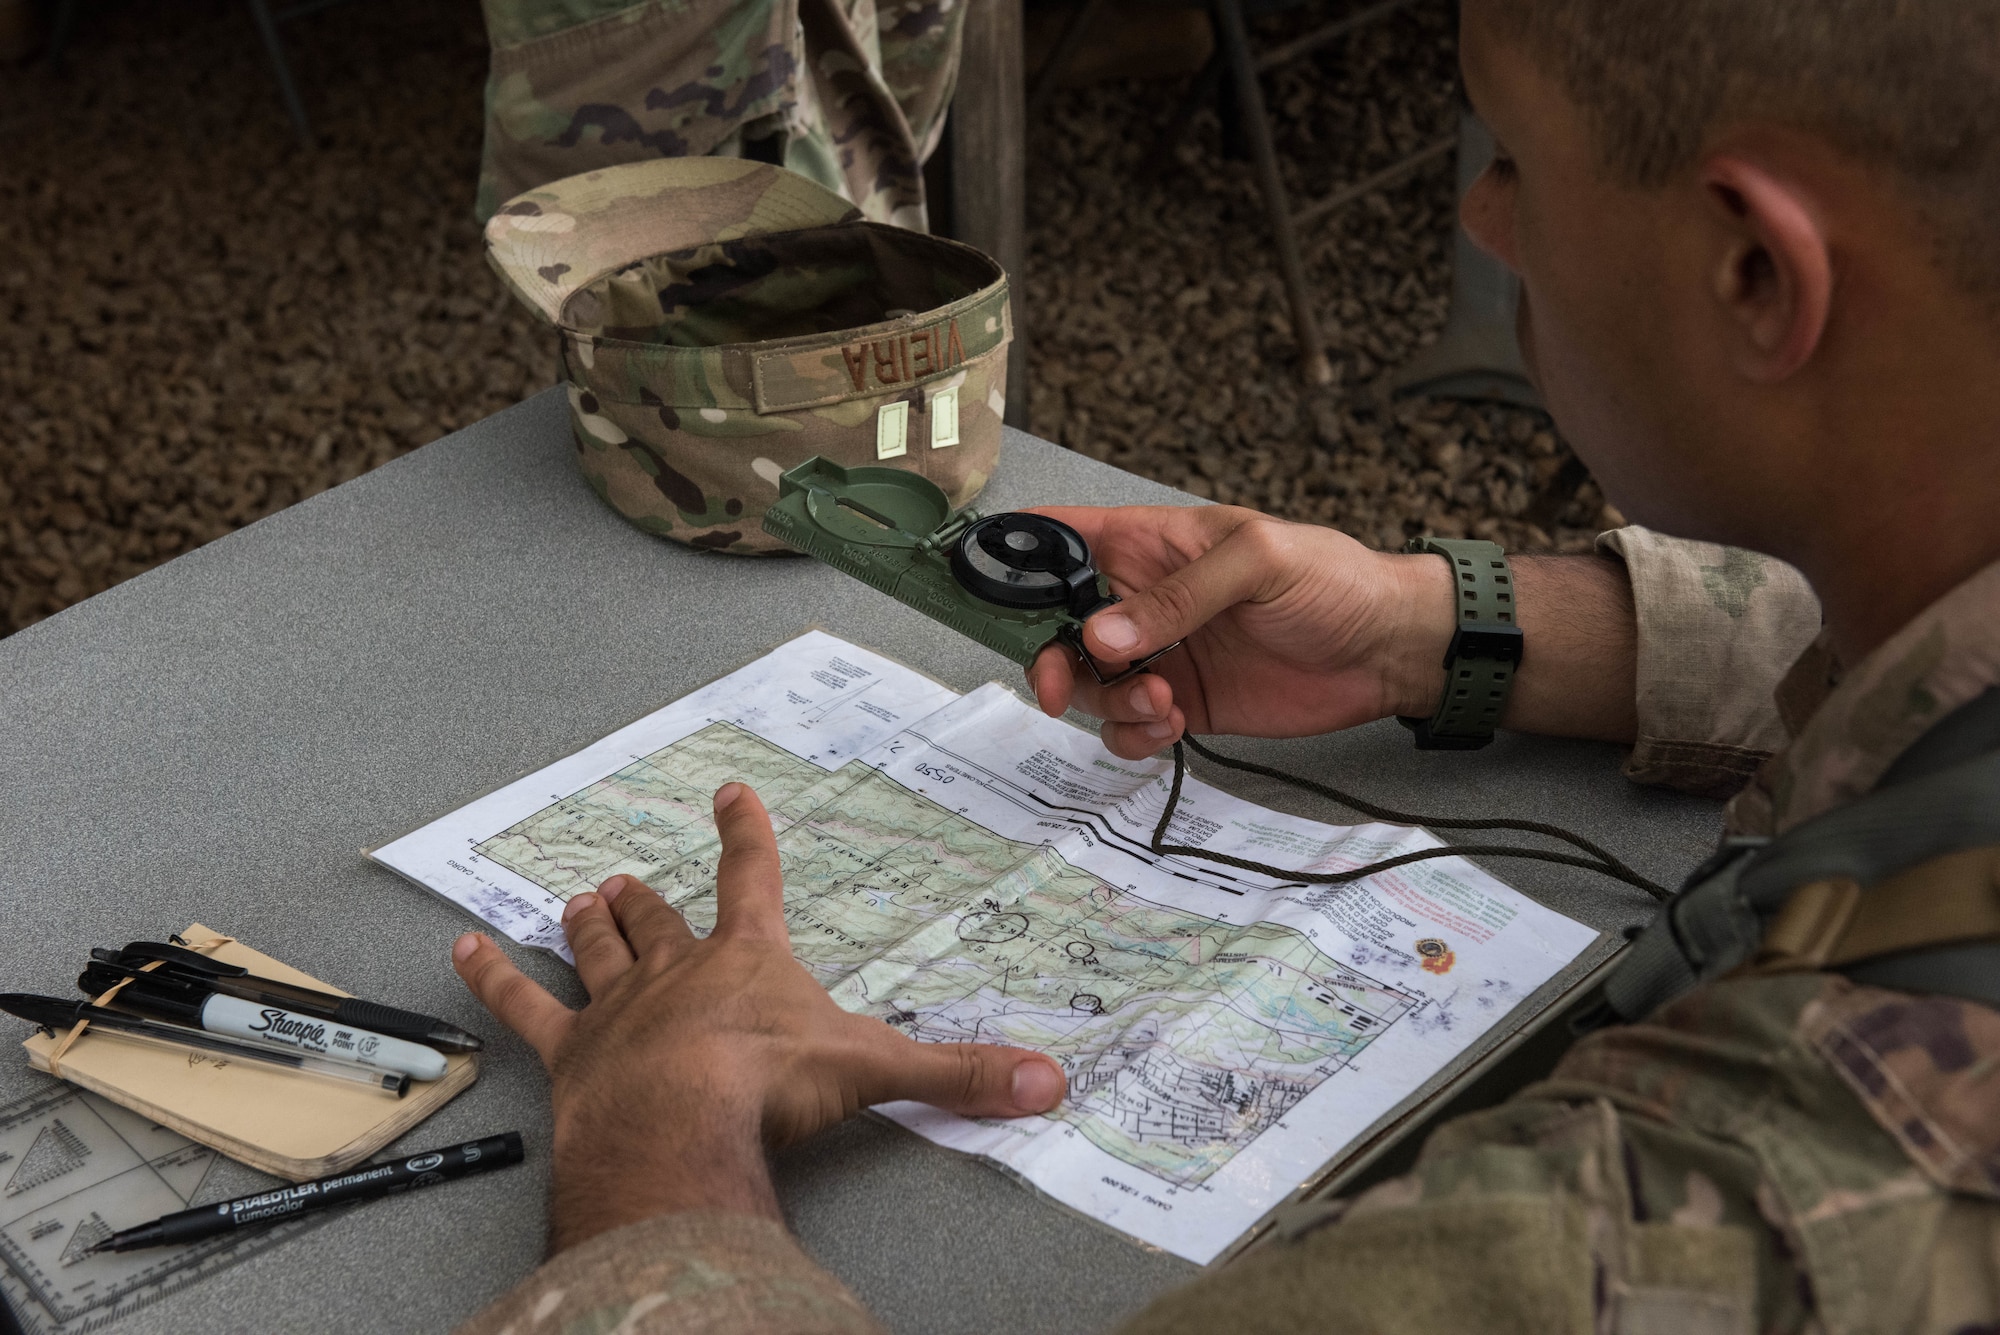 Tech. Sgt. Gabriell Vieira, Ranger Assessment Course student, learns about land navigation during training near Schofield Barracks, Oahu, Hawaii, May 13, 2019. Twenty-three Airmen from across the Air Force recently converged on a training camp for a three-week Ranger Assessment Course near Schofield Barracks, May 12-31, 2019. The purpose of the 19-day course is to prepare, assess and evaluate Air Force candidates for Army Ranger School. (U.S. Air Force photo by Staff Sgt. Hailey Haux)